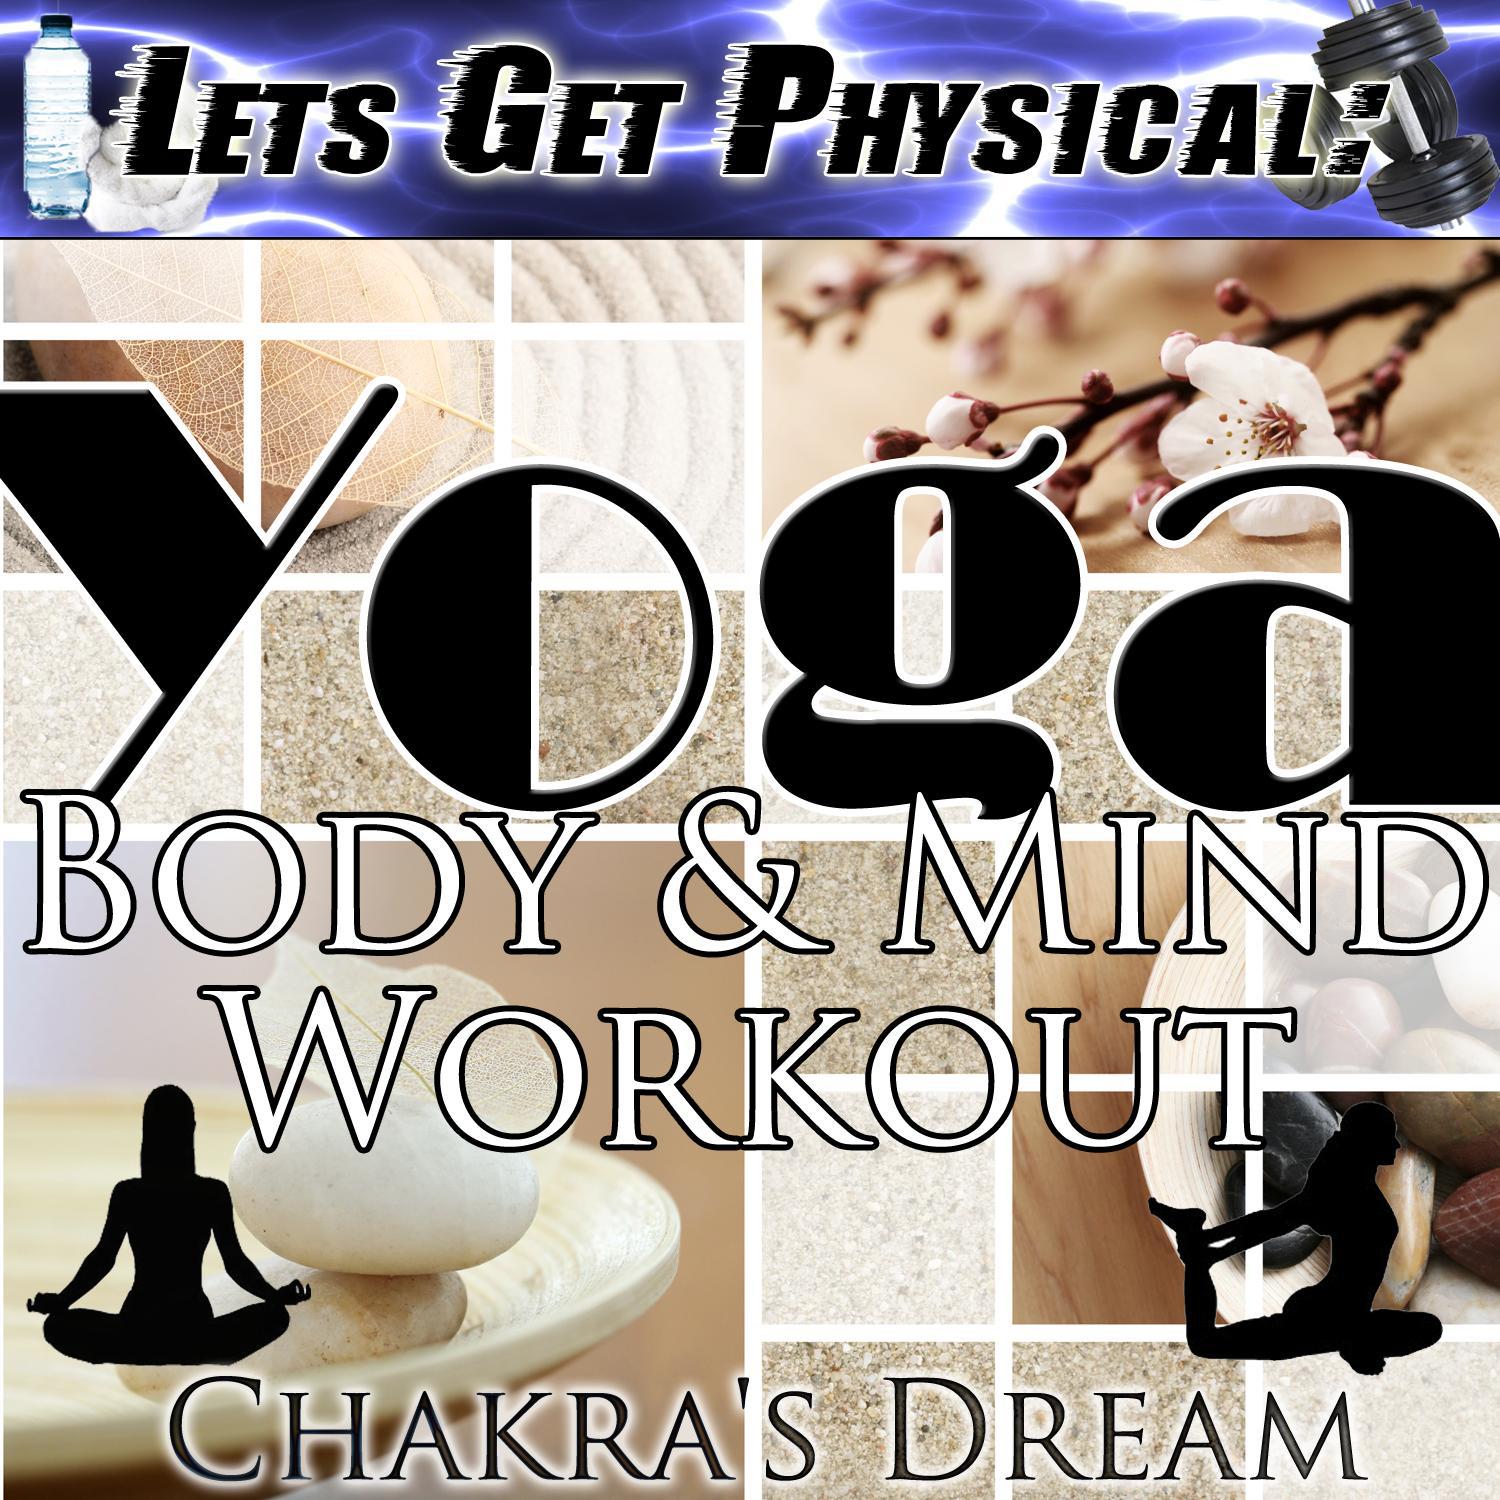 Let's Get Physical: Yoga Body & Mind Workout